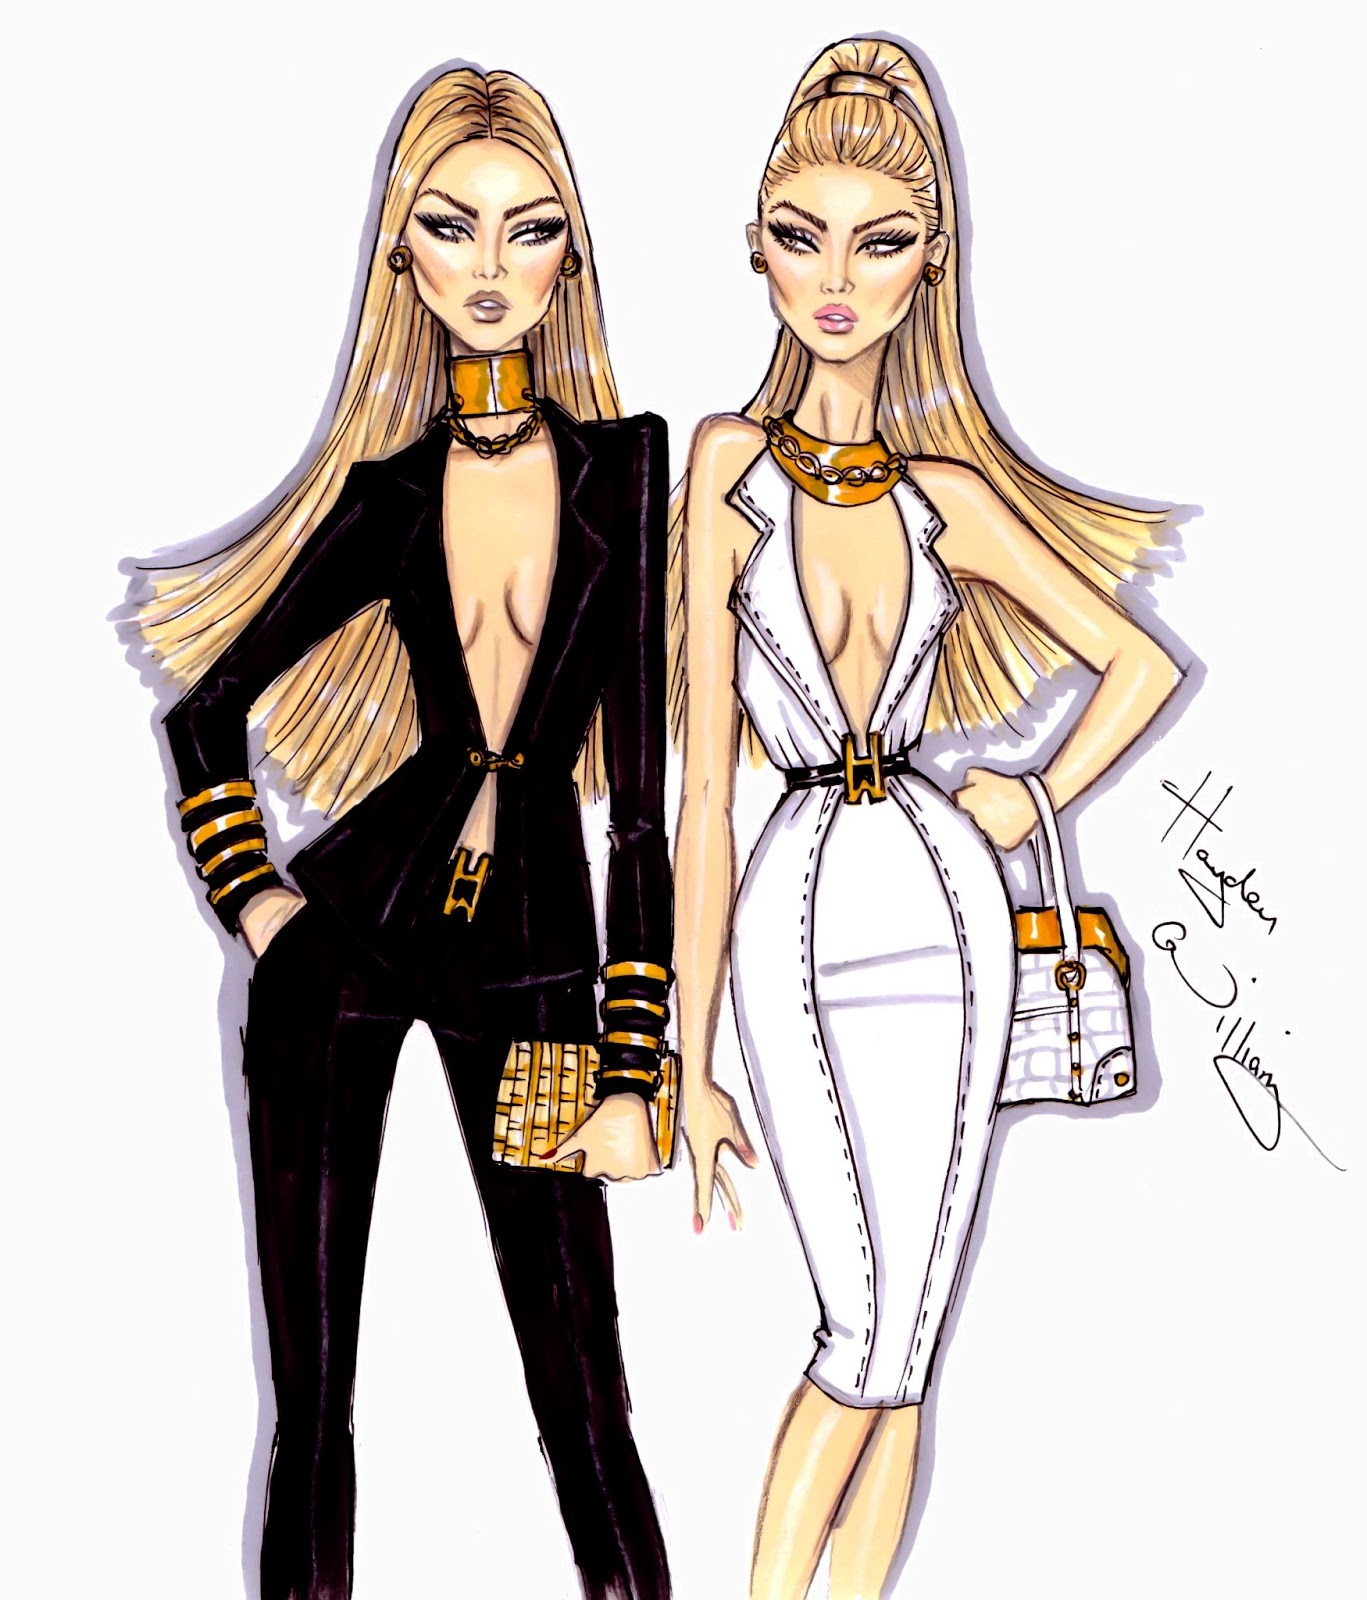 Hayden Williams Fashion Illustrations: 'Double Take' by Hayden Williams